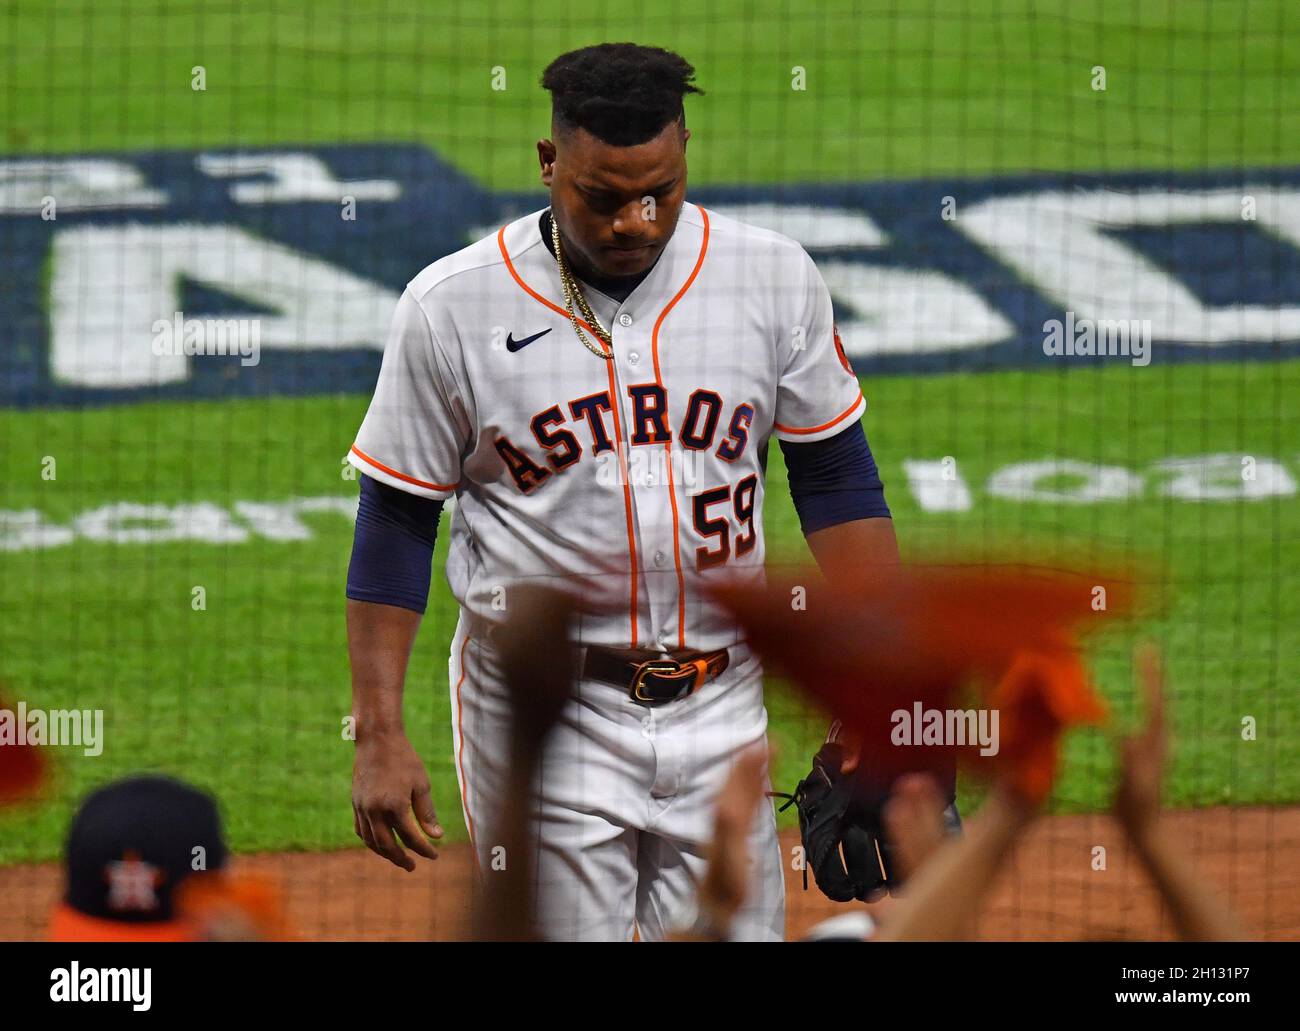 Winners win baby! Framber Literally an Ace Valdez - Houston Astros  fans celebrate team's win over the Texas Rangers behind Framber Valdez's  22nd consecutive quality start